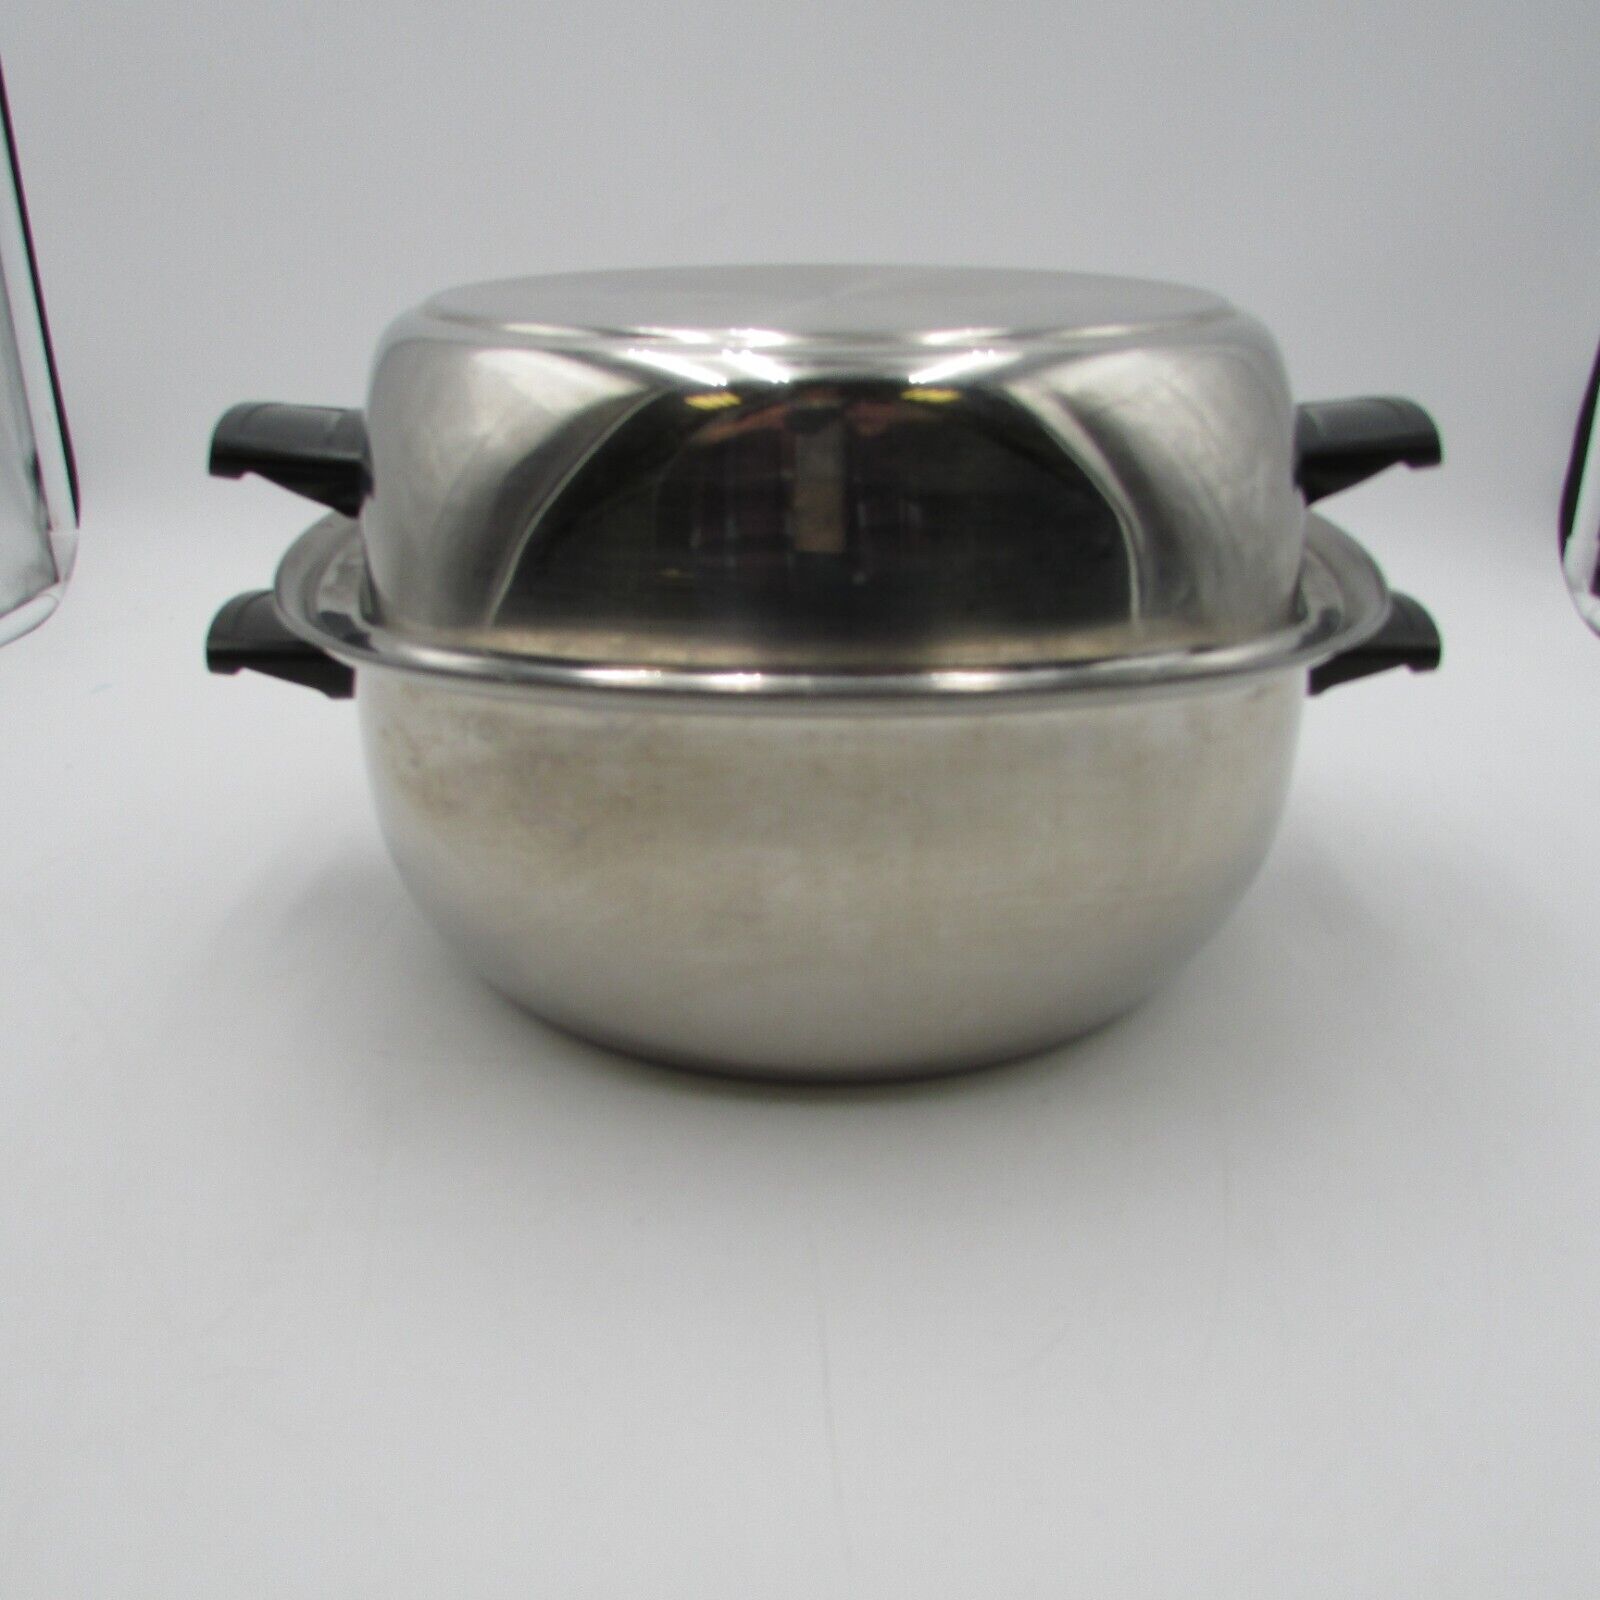 Aristo Craft West Bend Vintage Stainless 12 Inch Square Dutch Pot With Dome Lid